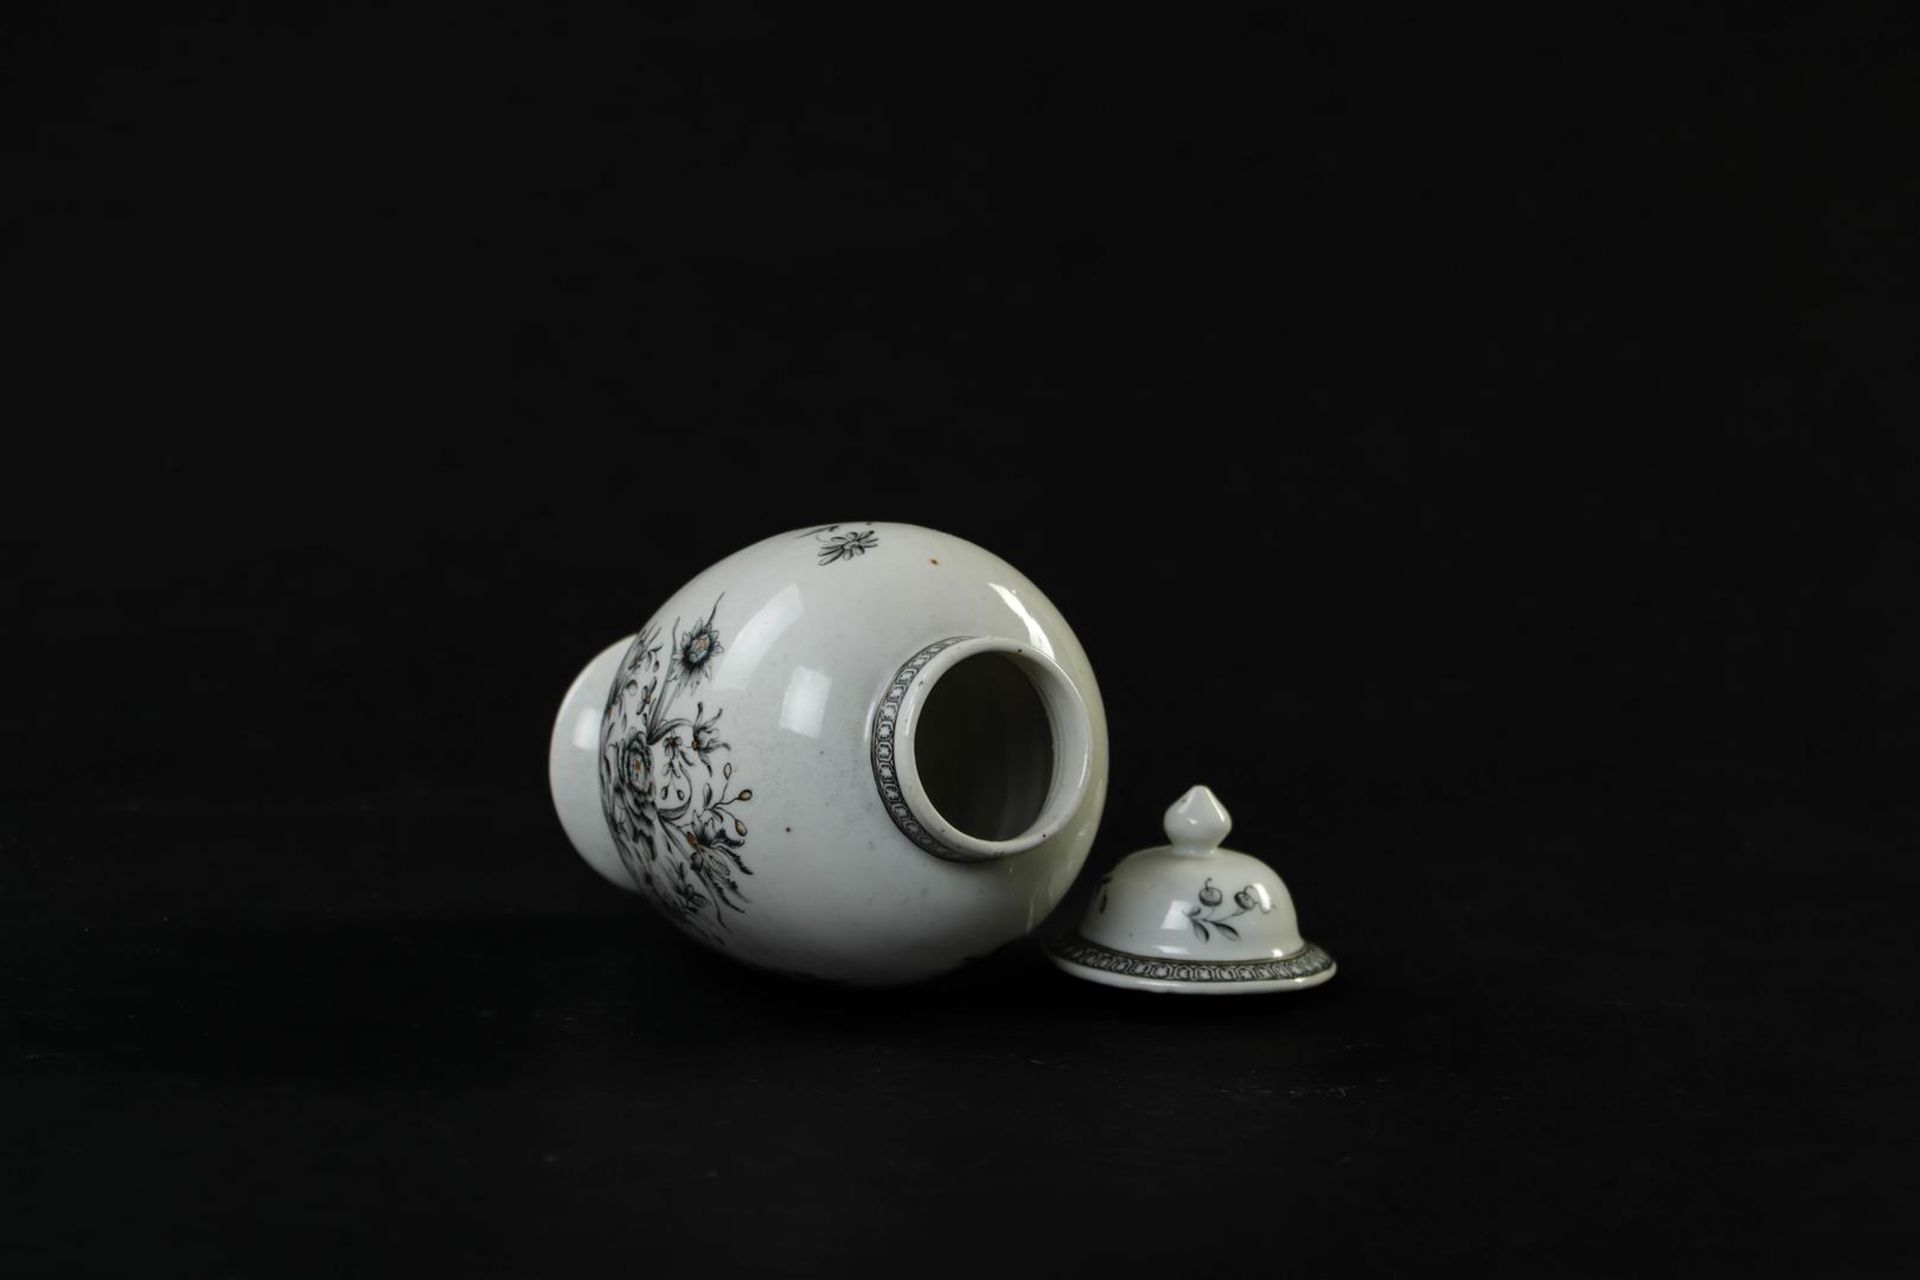 An Encre de Chine tableware set consisting of a teapot, milk jug, tea caddy, patty pan and spoon tra - Image 20 of 24